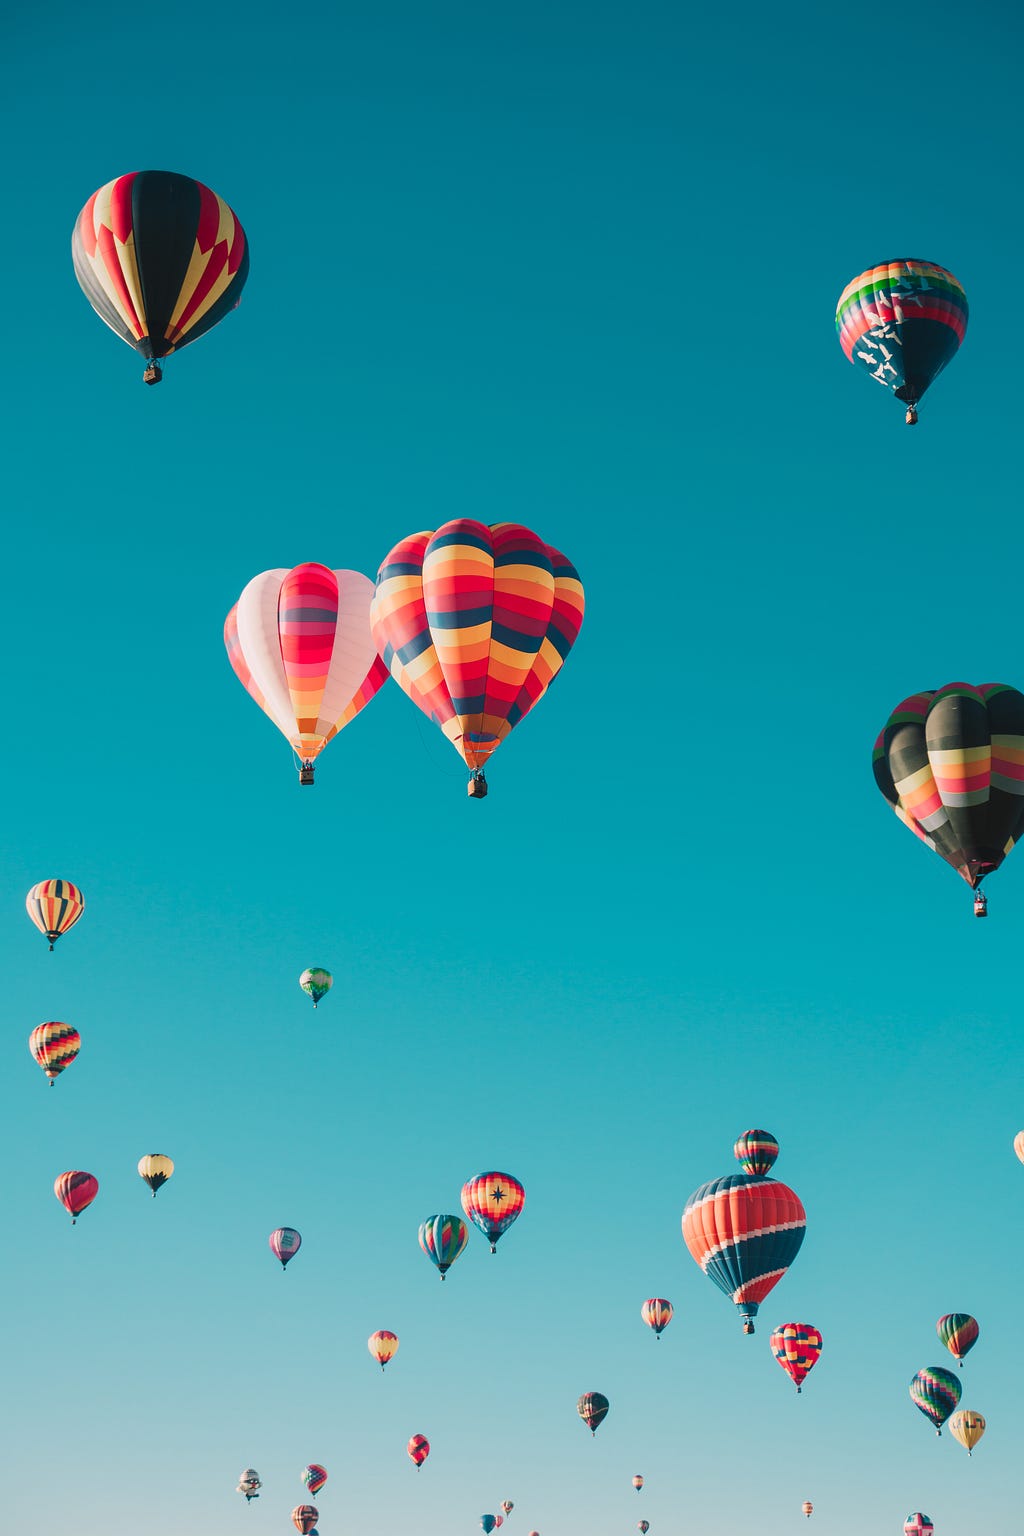 A picture of hot air balloons floating in the air to depict freedom one finds from minimalism and the endless possibilities that the universe has to offer.